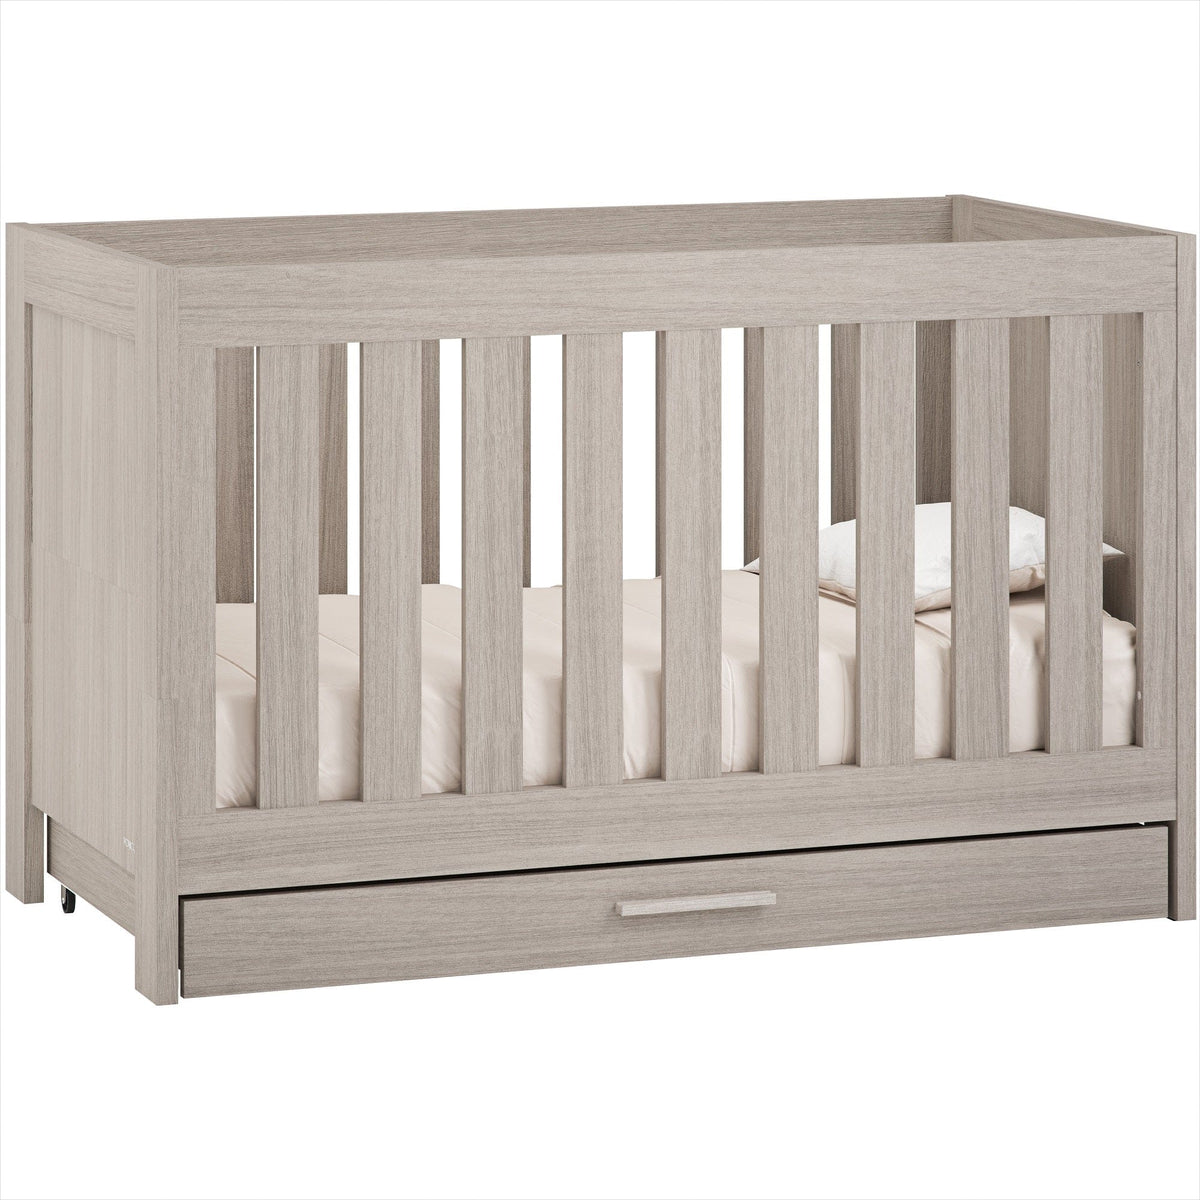 Venicci Forenzo cot bed with drawer